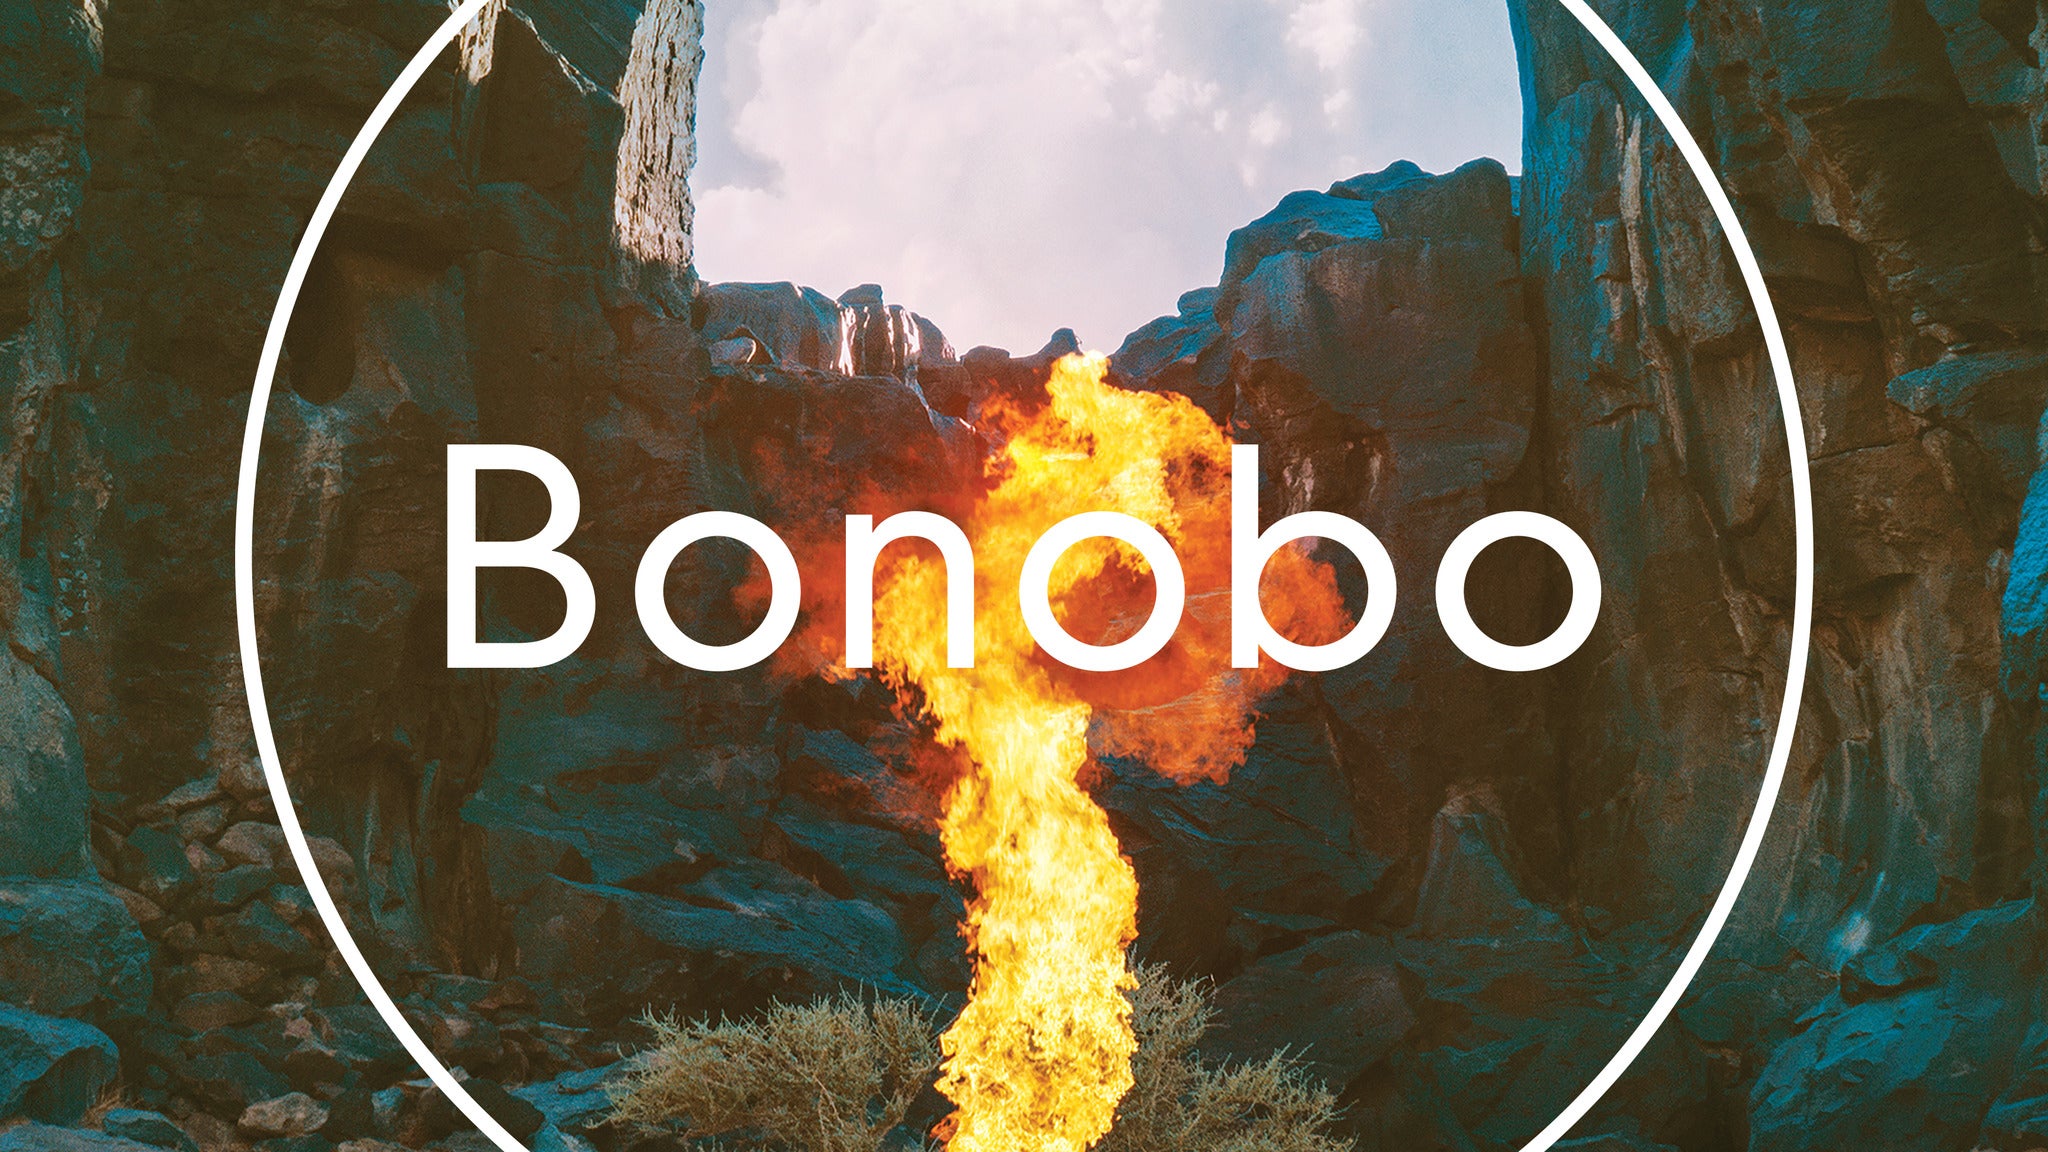 Bonobo (moved to Fox Theater - Oakland)